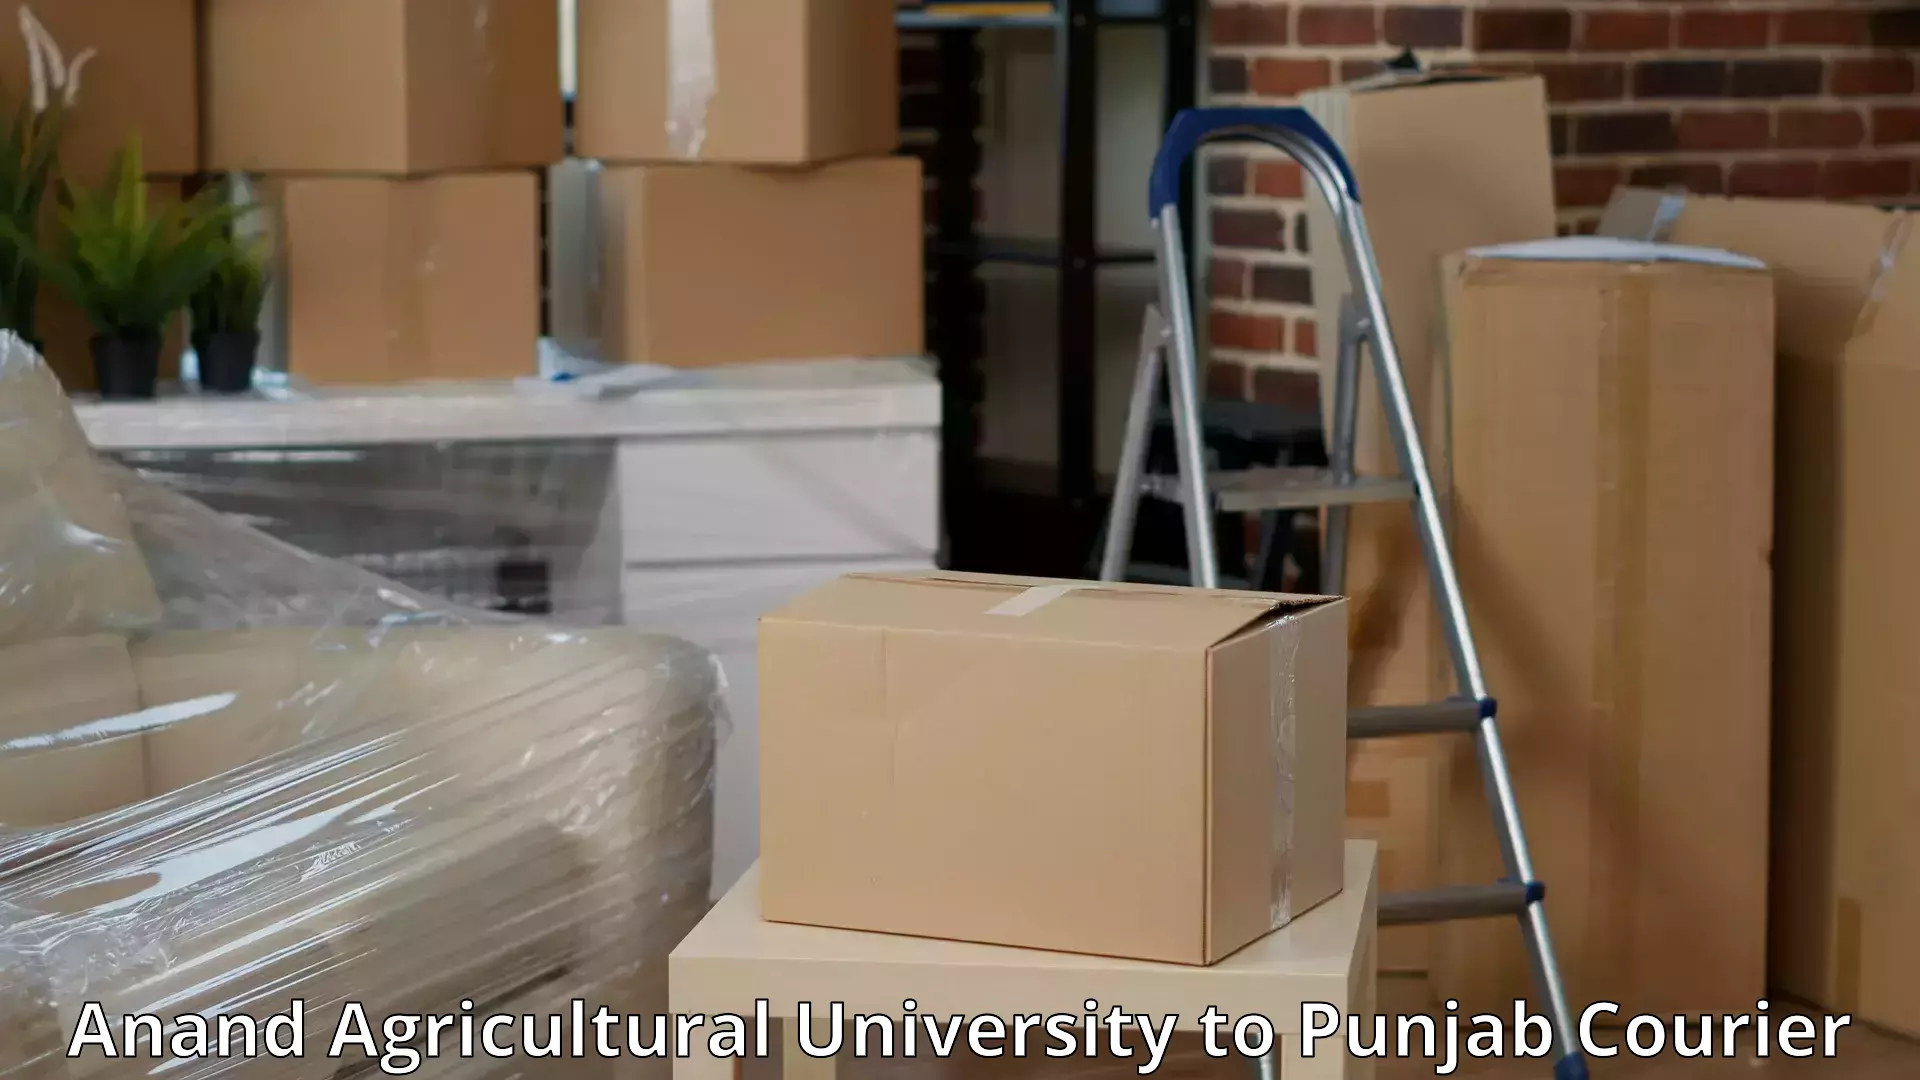 Full-service relocation in Anand Agricultural University to Jalandhar